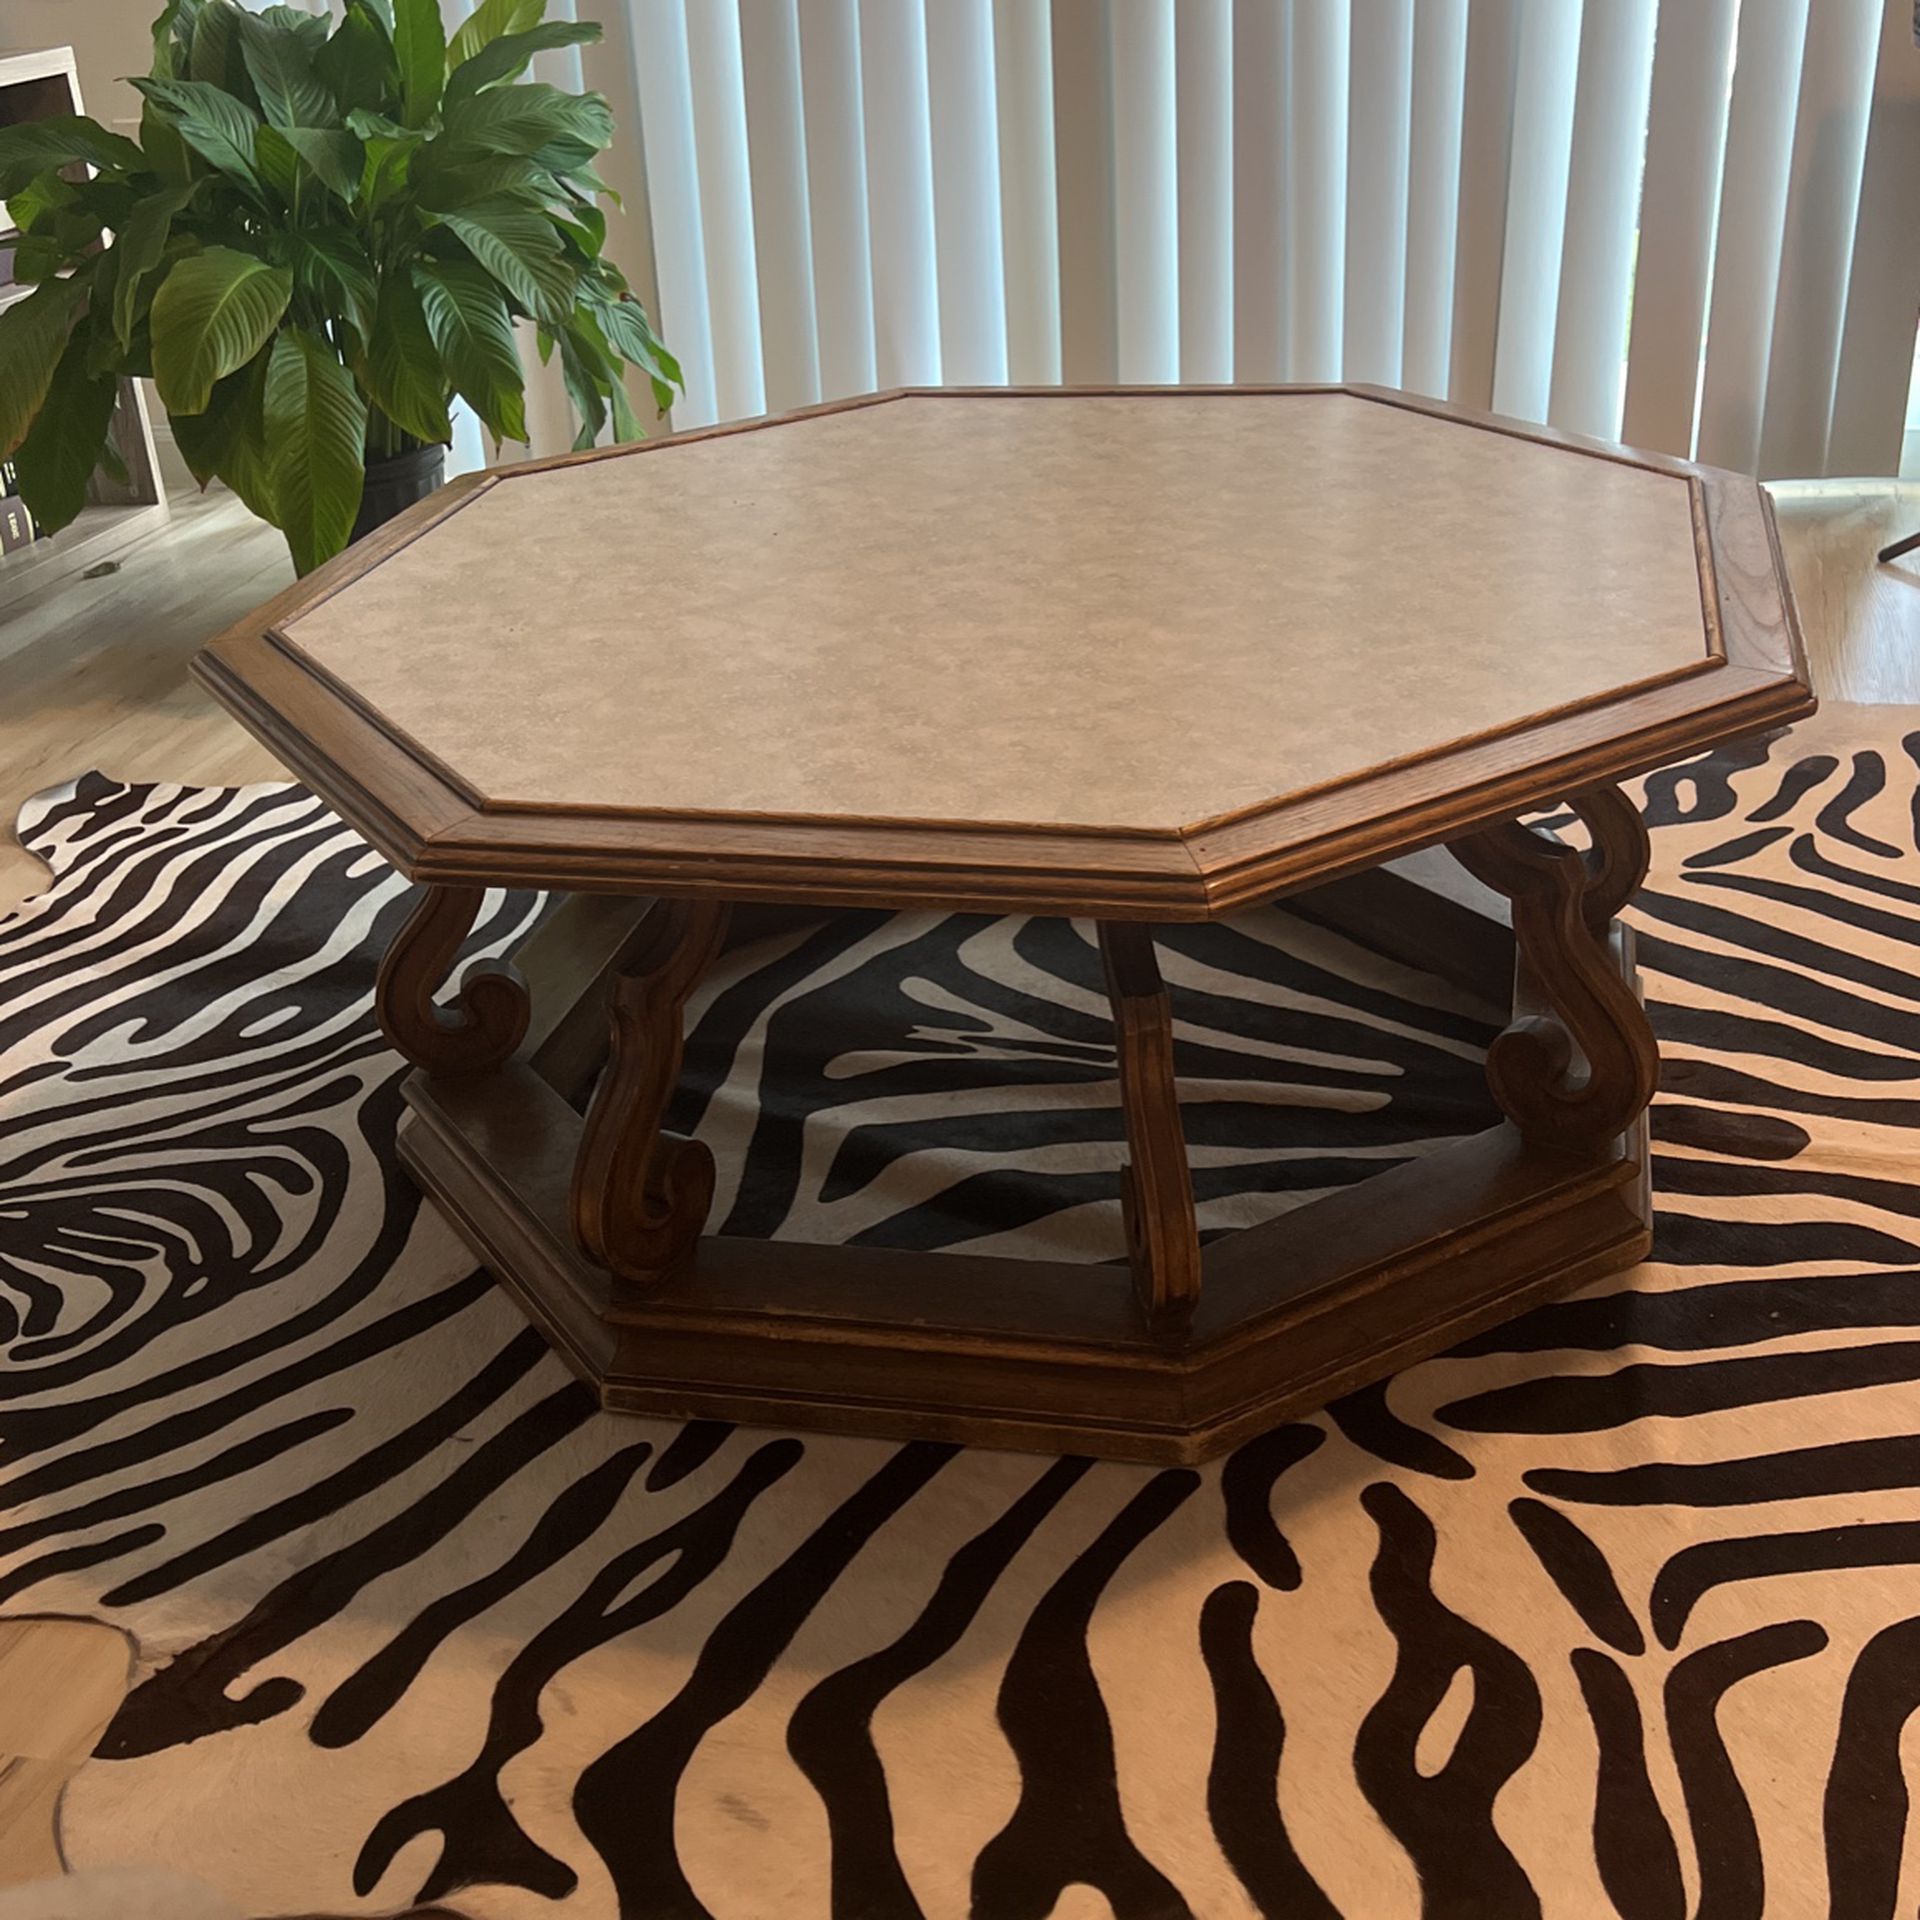 Wooden Coffee Table Octagon Shape 